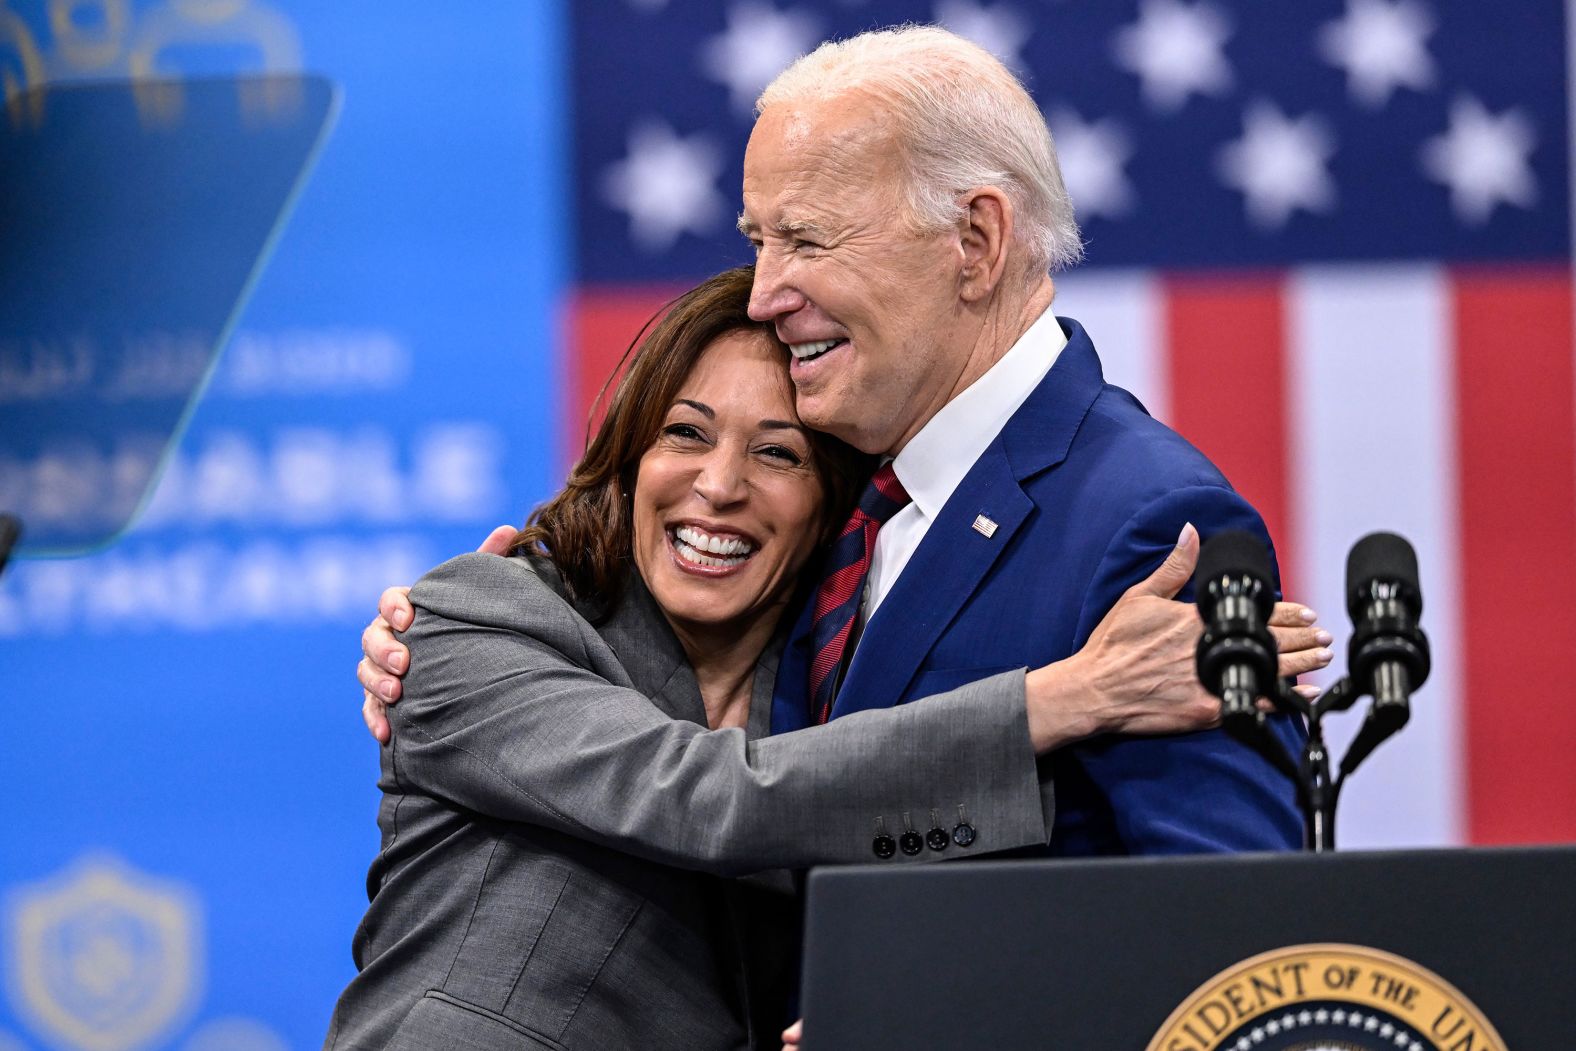 US Vice President Kamala Harris embraces President Joe Biden after a speech in Raleigh, North Carolina, on Tuesday, March 26. <a href="index.php?page=&url=https%3A%2F%2Fwww.cnn.com%2F2024%2F03%2F26%2Fpolitics%2Fjoe-biden-kamala-harris-north-carolina%2Findex.html" target="_blank">The rare joint appearance</a> highlighted the emphasis that the duo will place on health care, which they believe is a winning issue for them ahead of November's election.